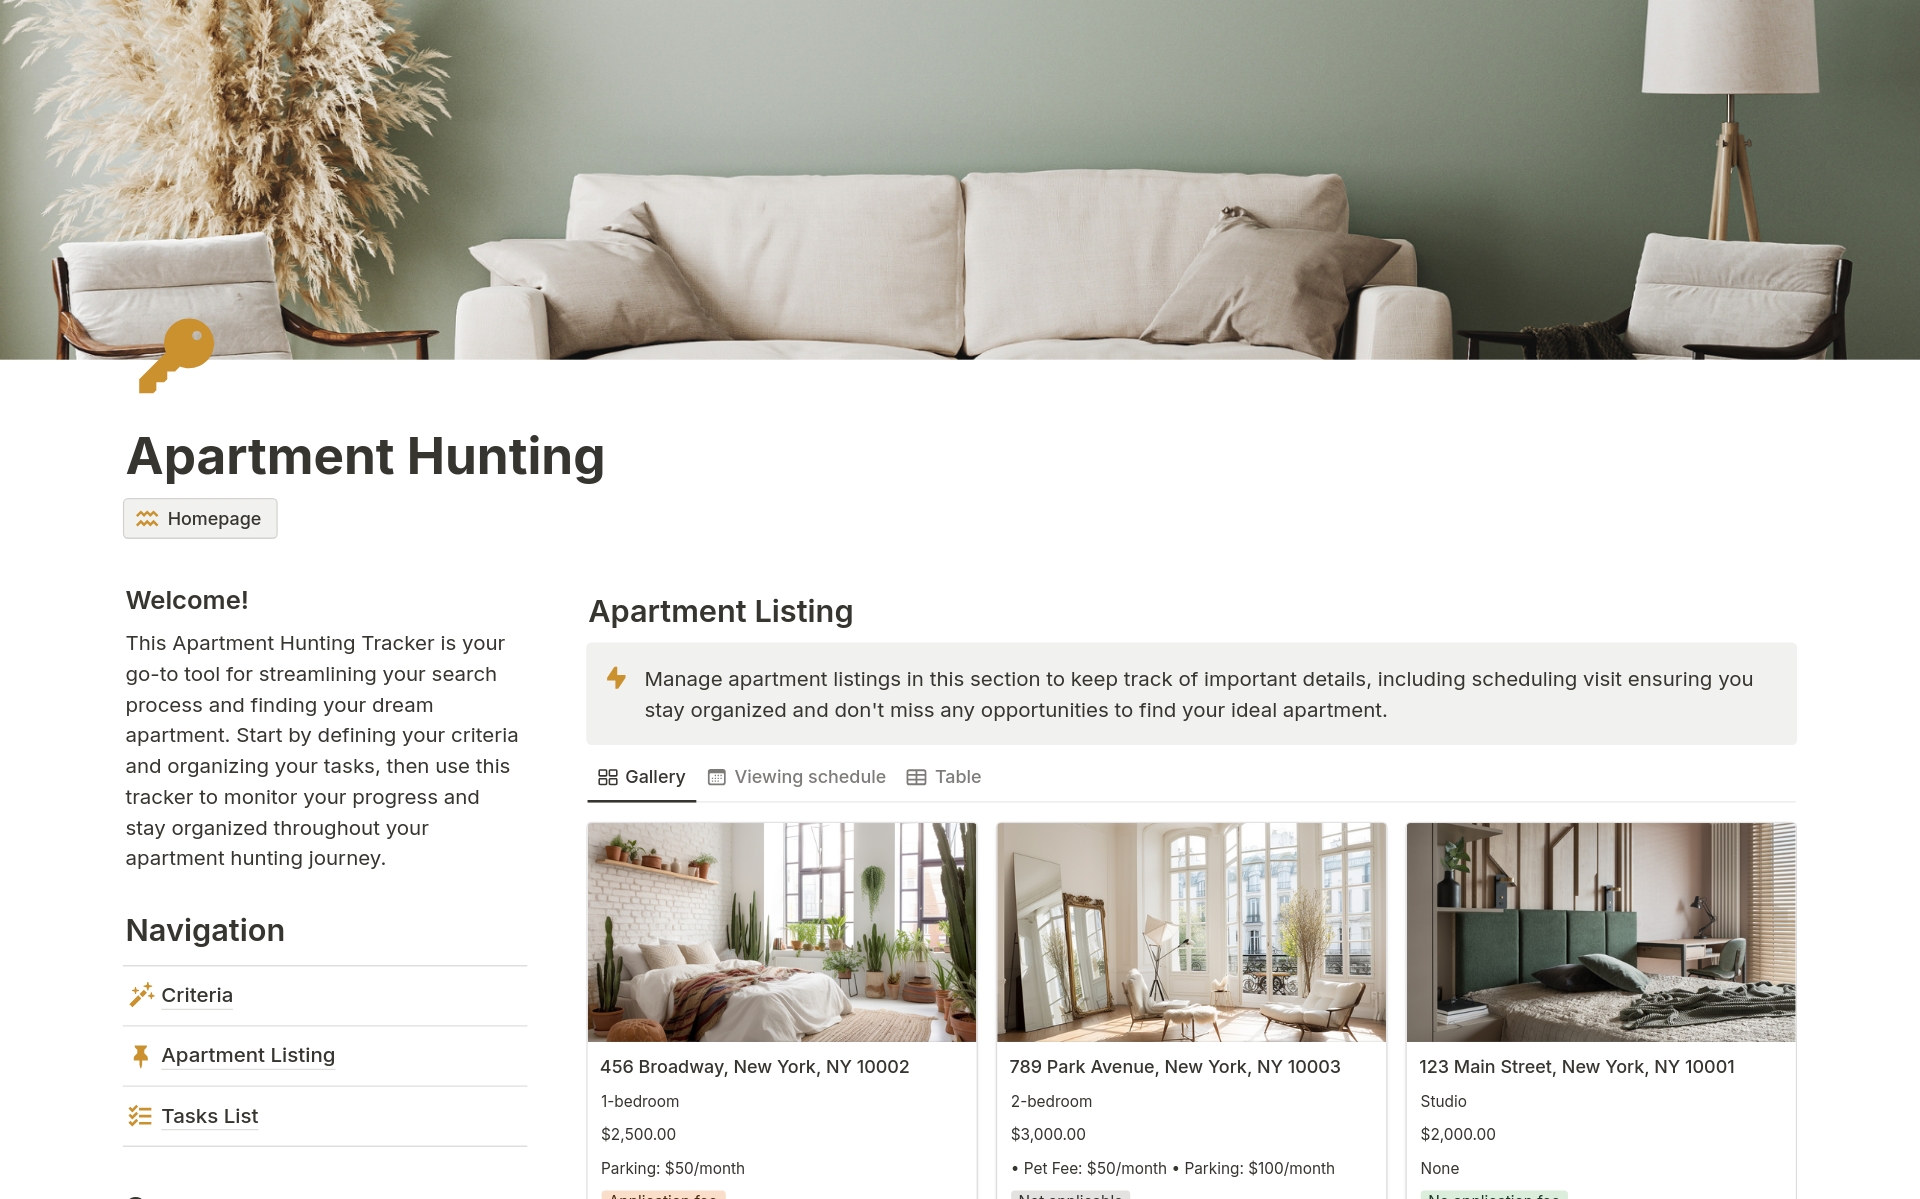 Streamline your apartment search with our Apartment Hunting Tracker. Stay organized, track viewings, and find your dream home hassle-free!